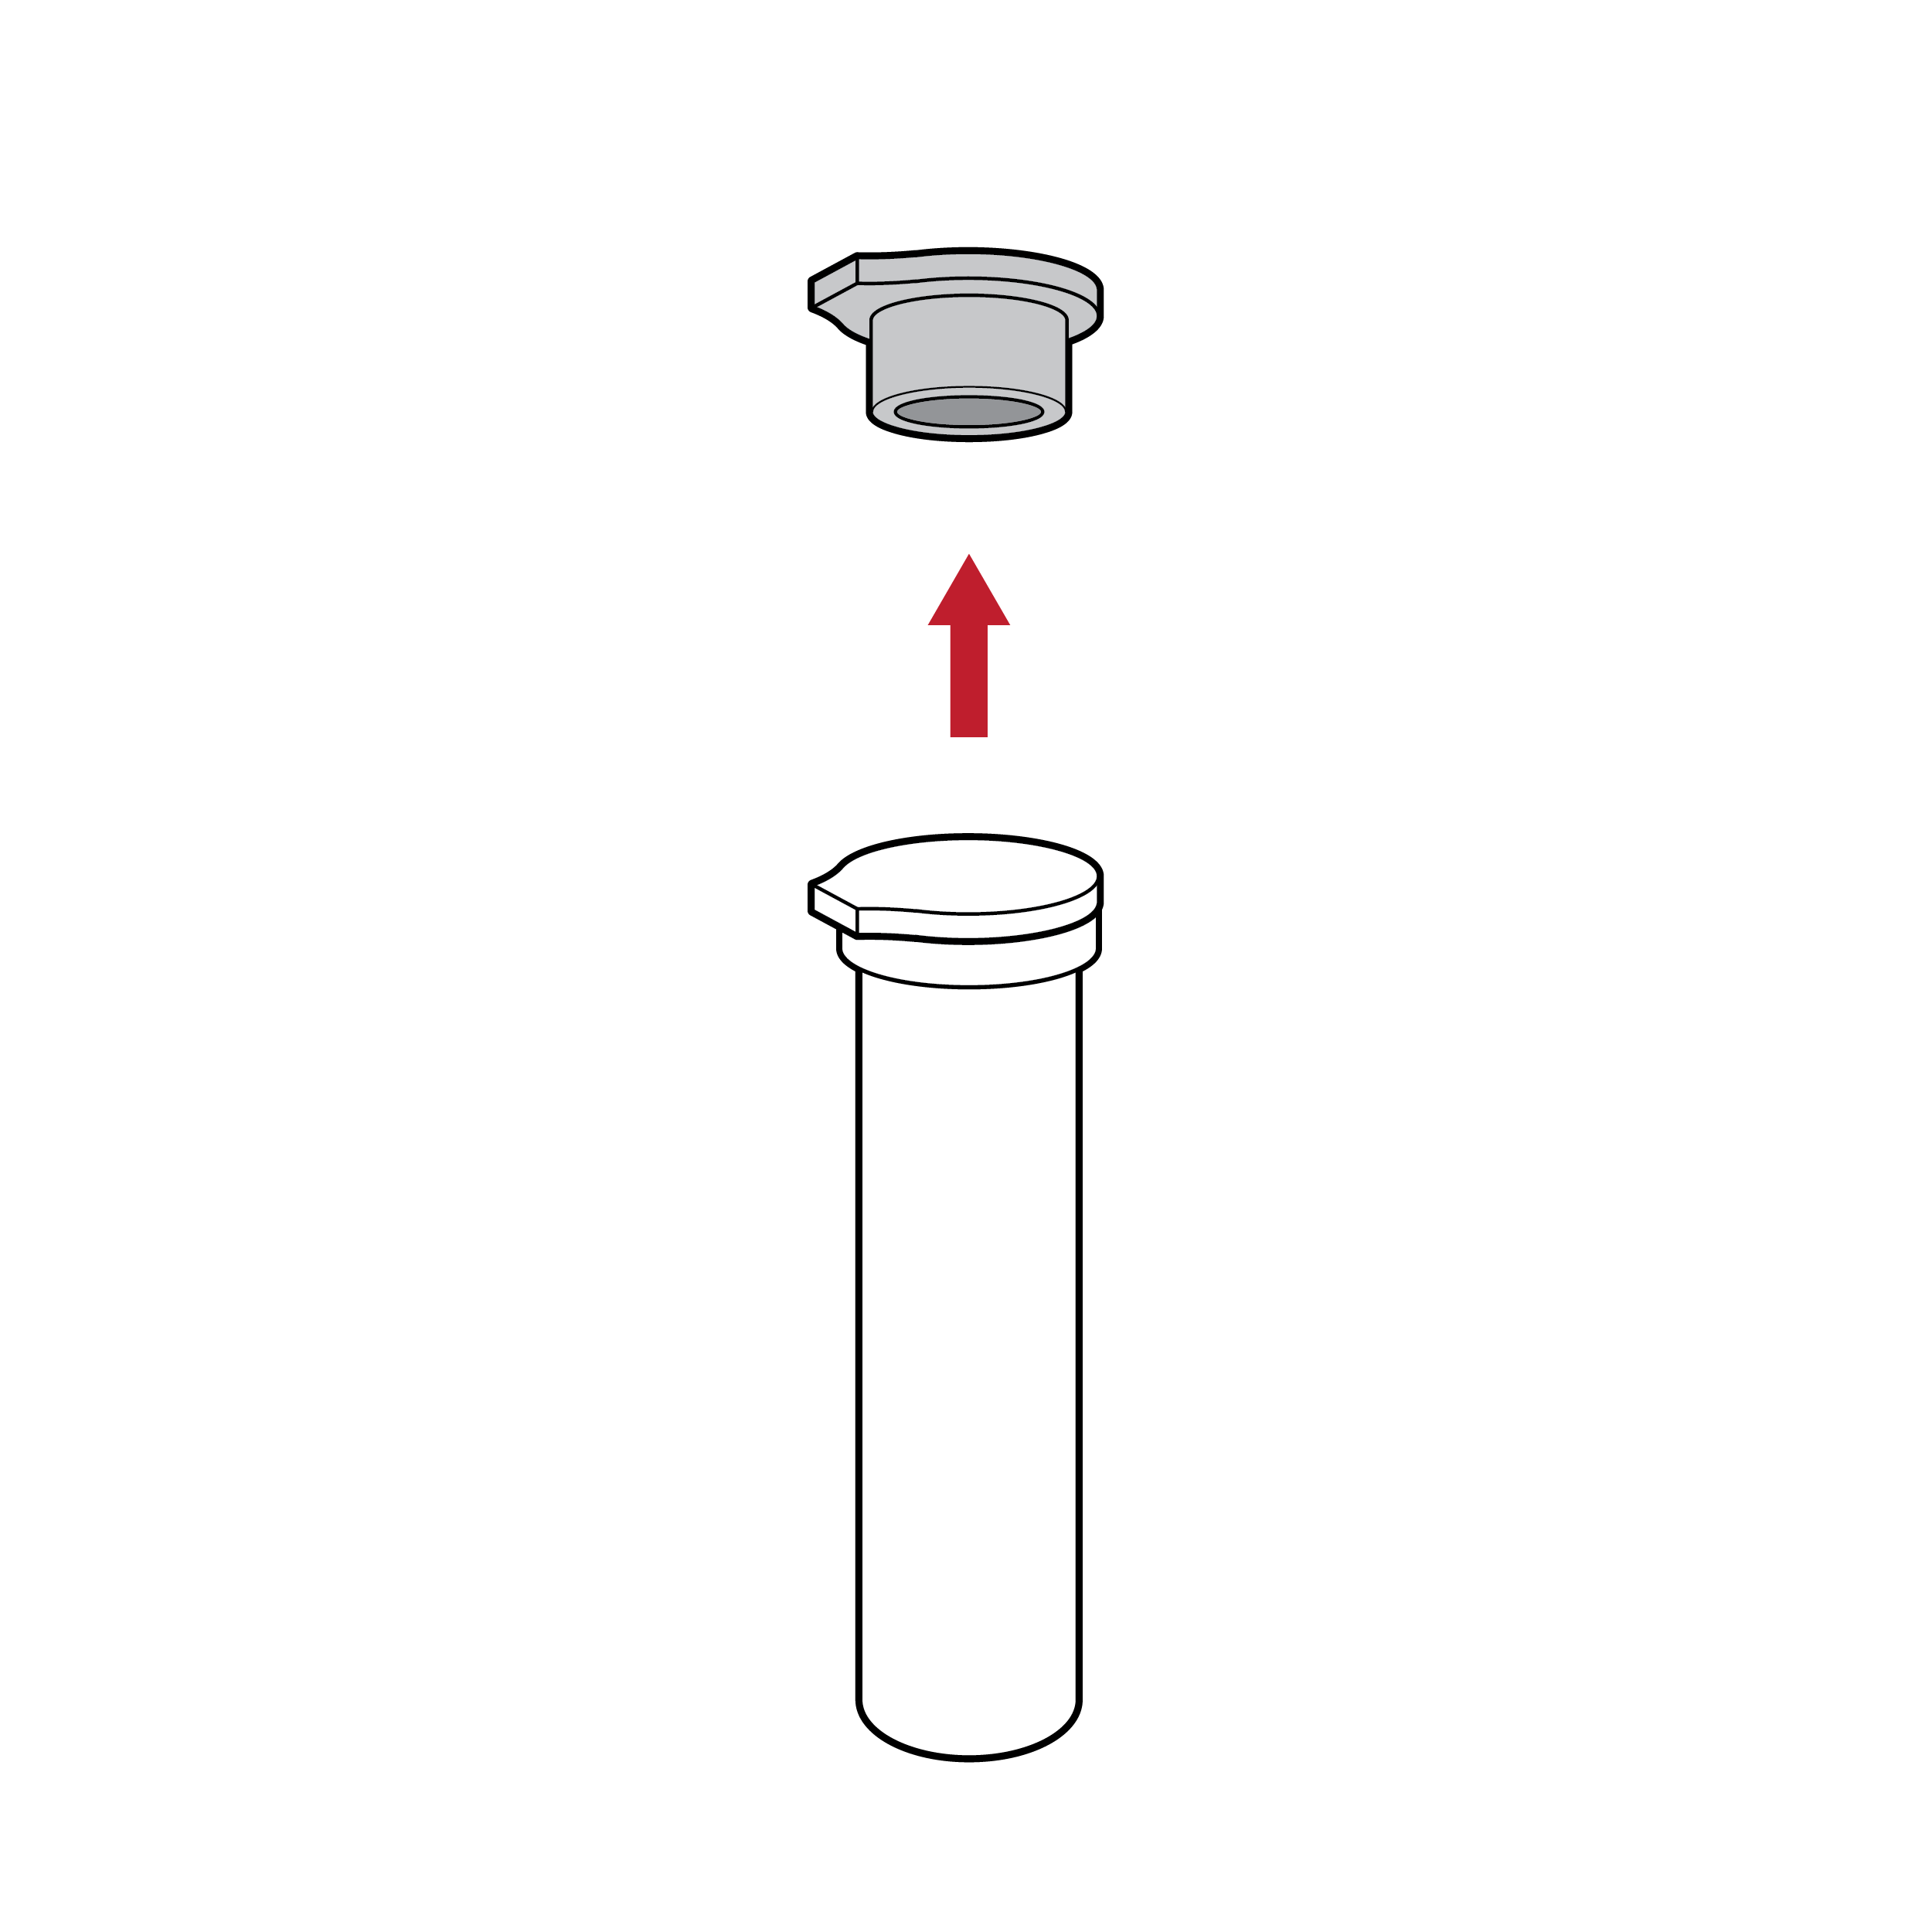 Cylindrical fluid vial with cap. An arrow pointing upwards indicates the cap is removed by a linear push motion. Cap has very small lip for pushing off.